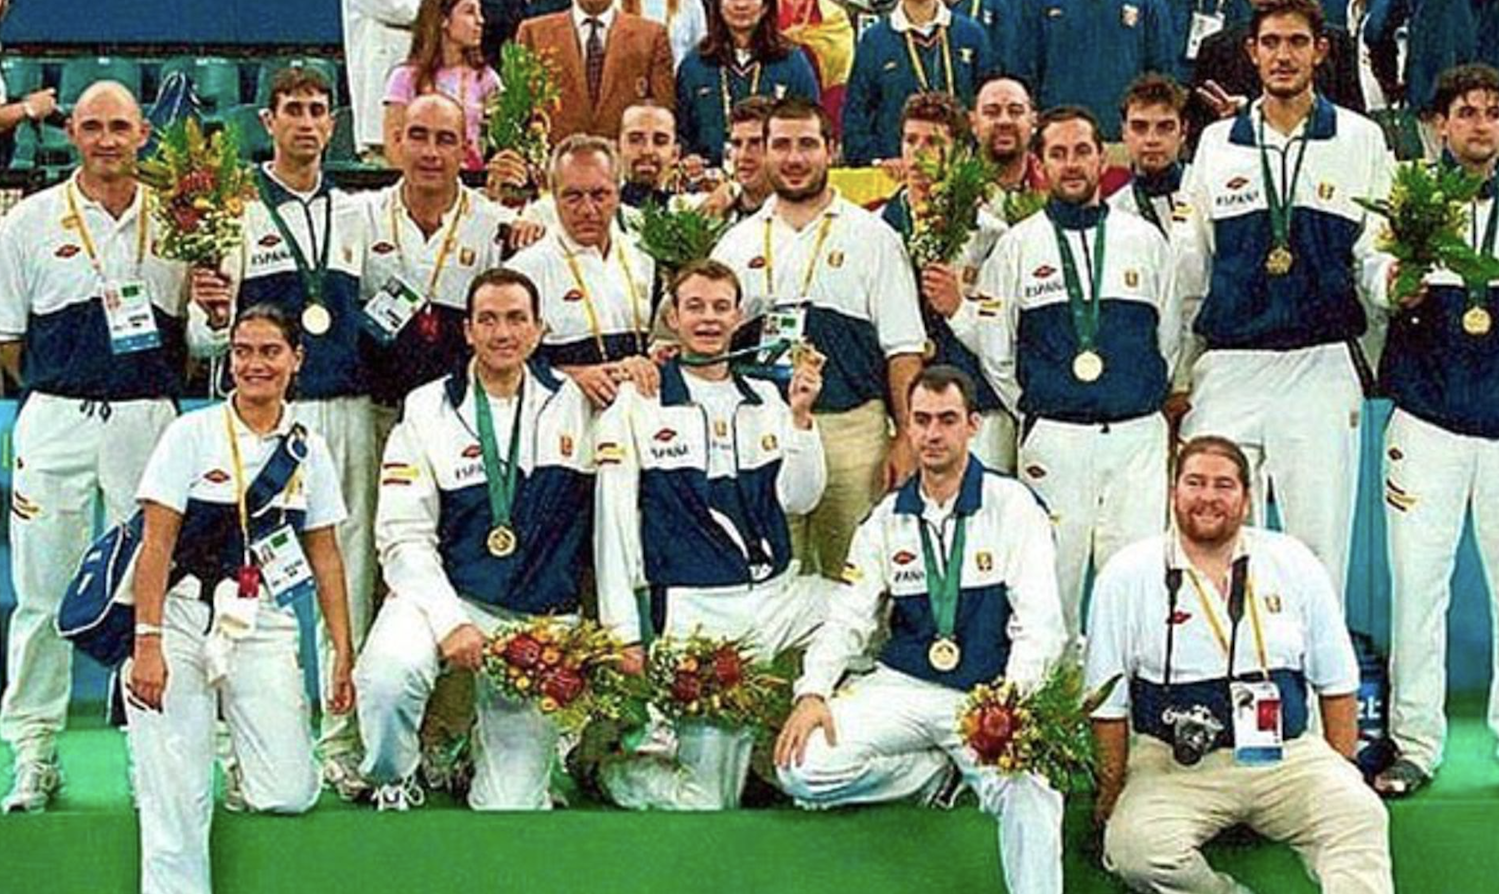 The Spanish Paralympic basketball team in 2000 was eventually found to have no disabled players.